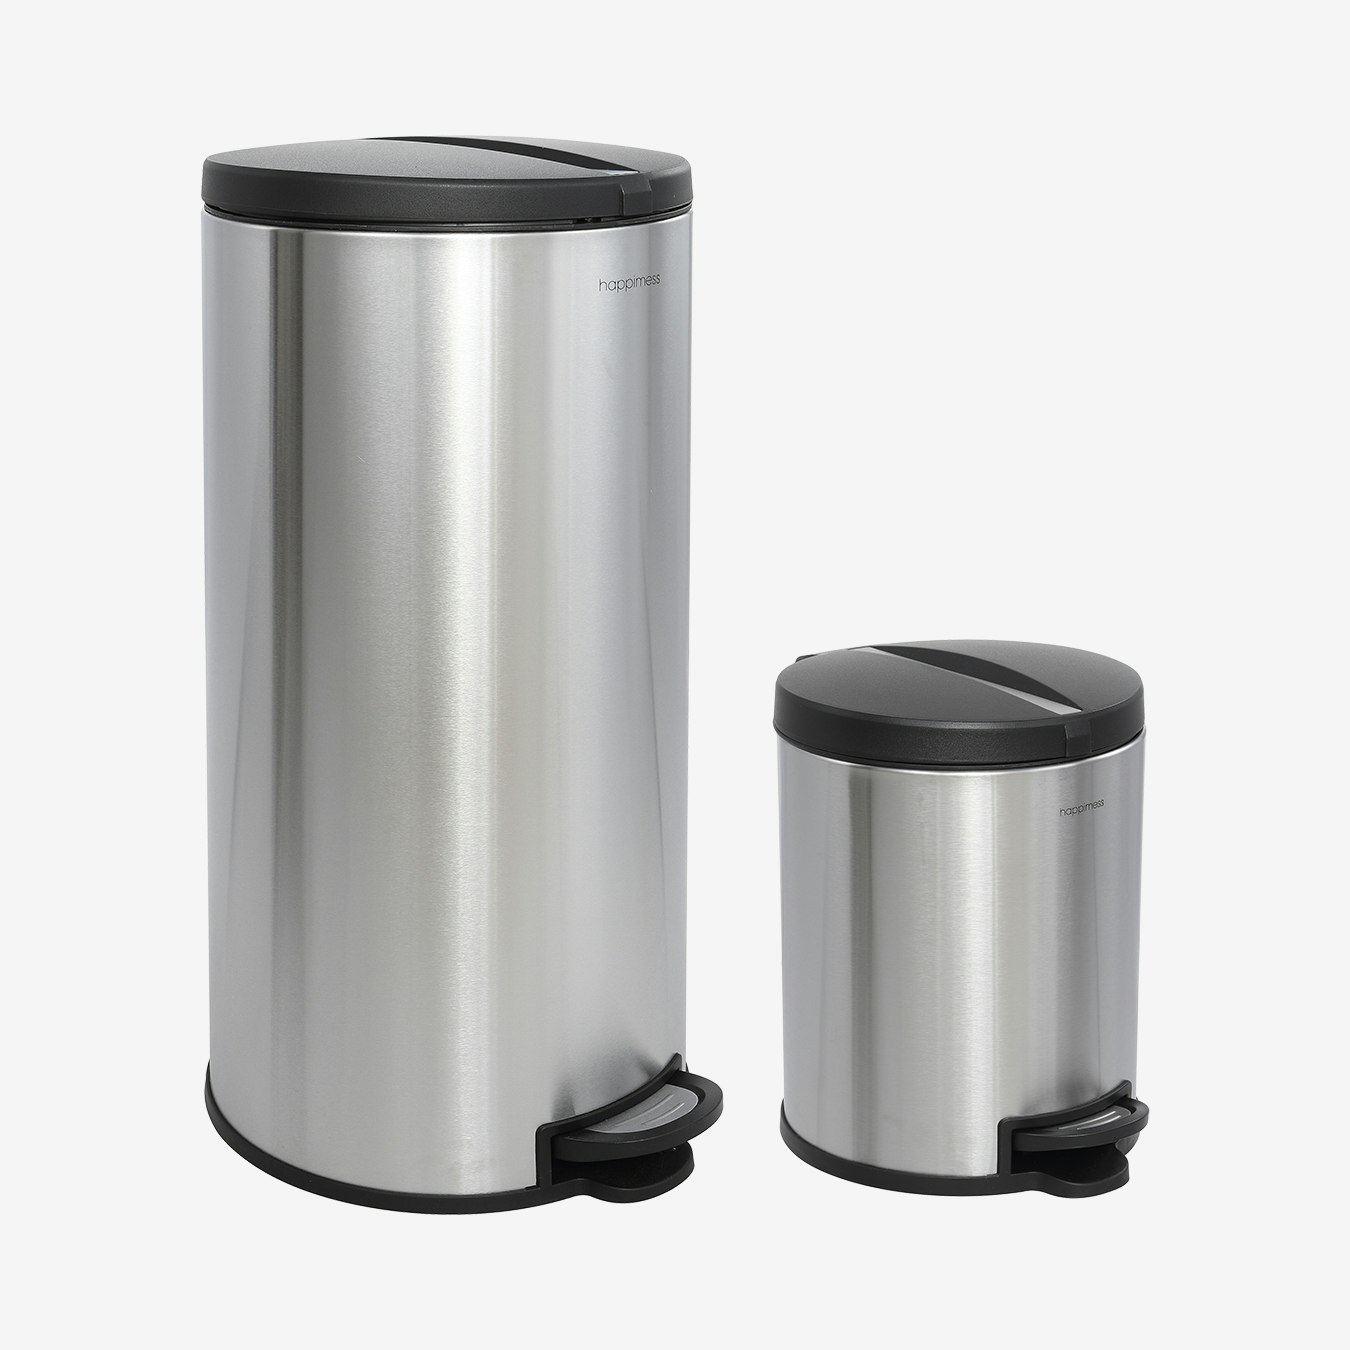 Oscar Round Step-Open Trash Cans - Black / Silver - Iron - Set of